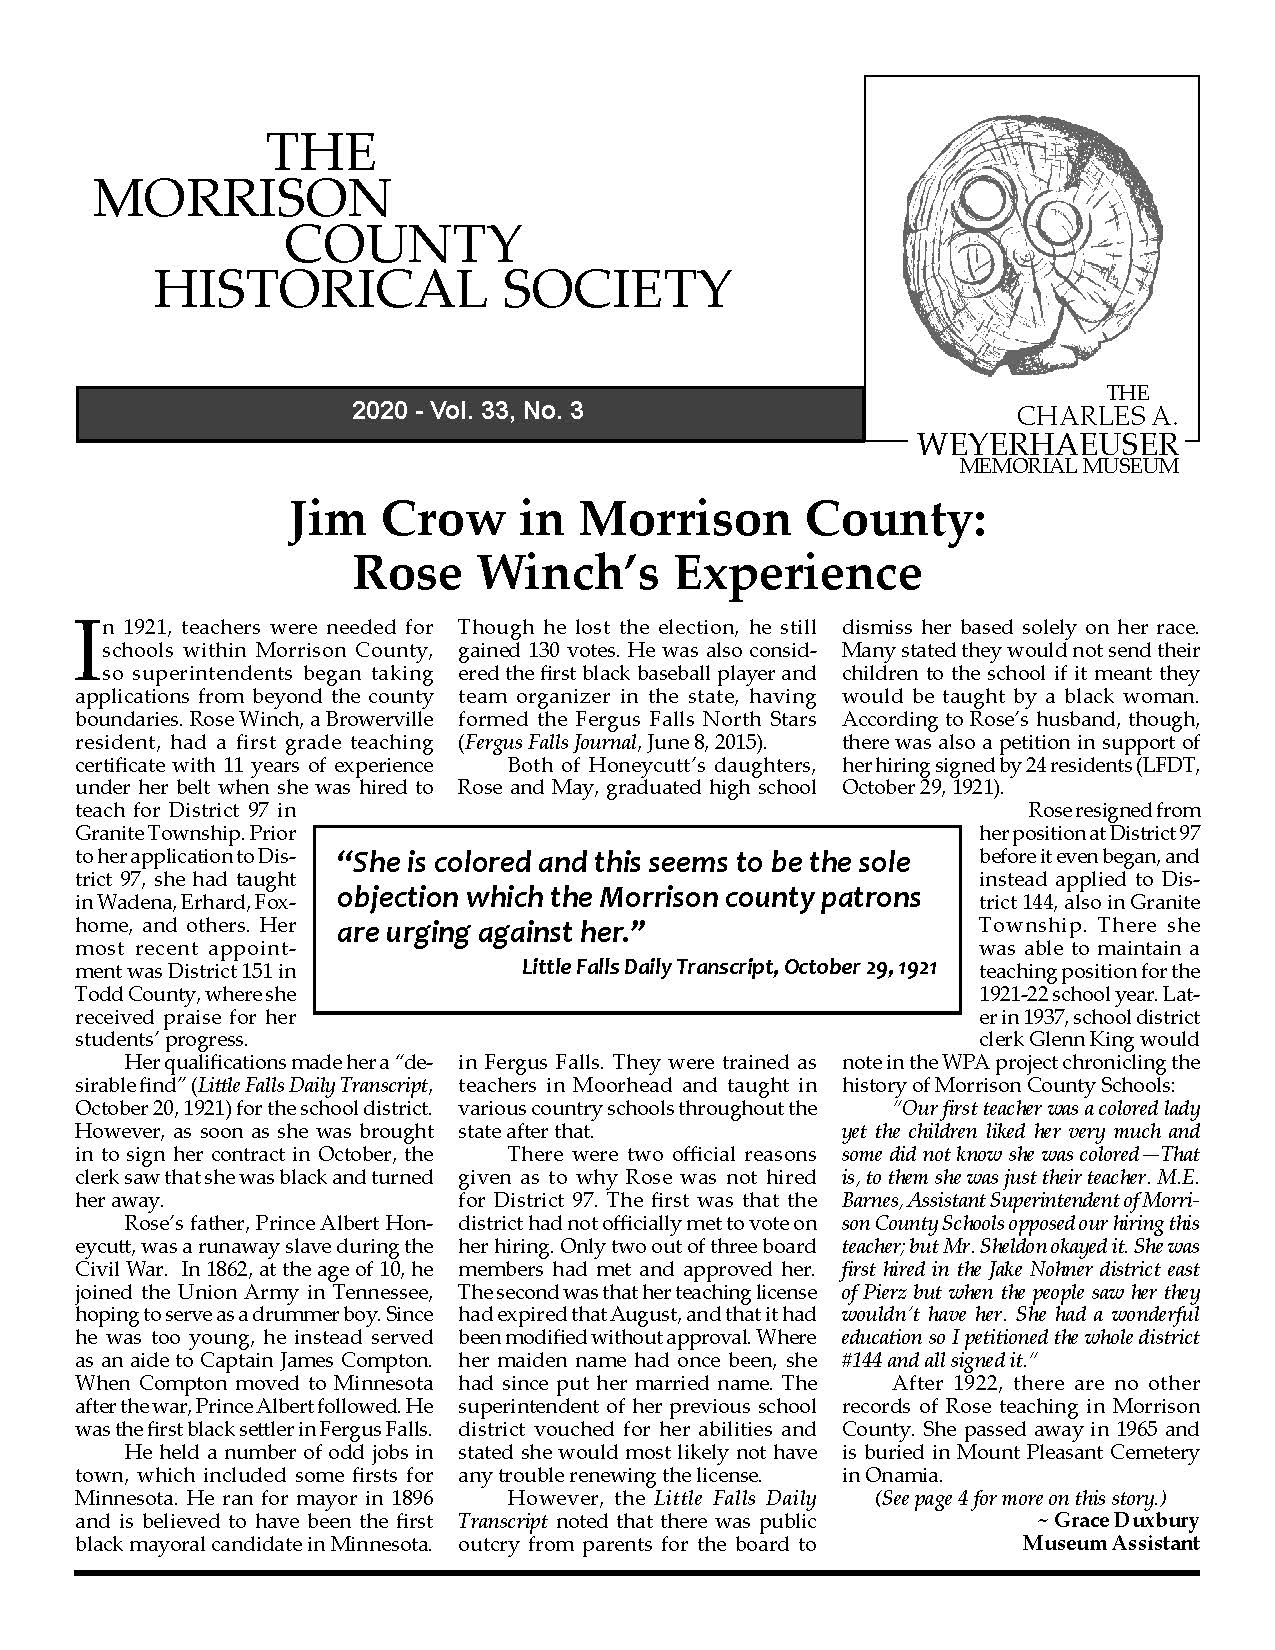 Front page of Morrison County Historical Society newsletter, Vol. 33, No. 3, 2020: Jim Crow in Morrison County: Rose Winch's Experience.